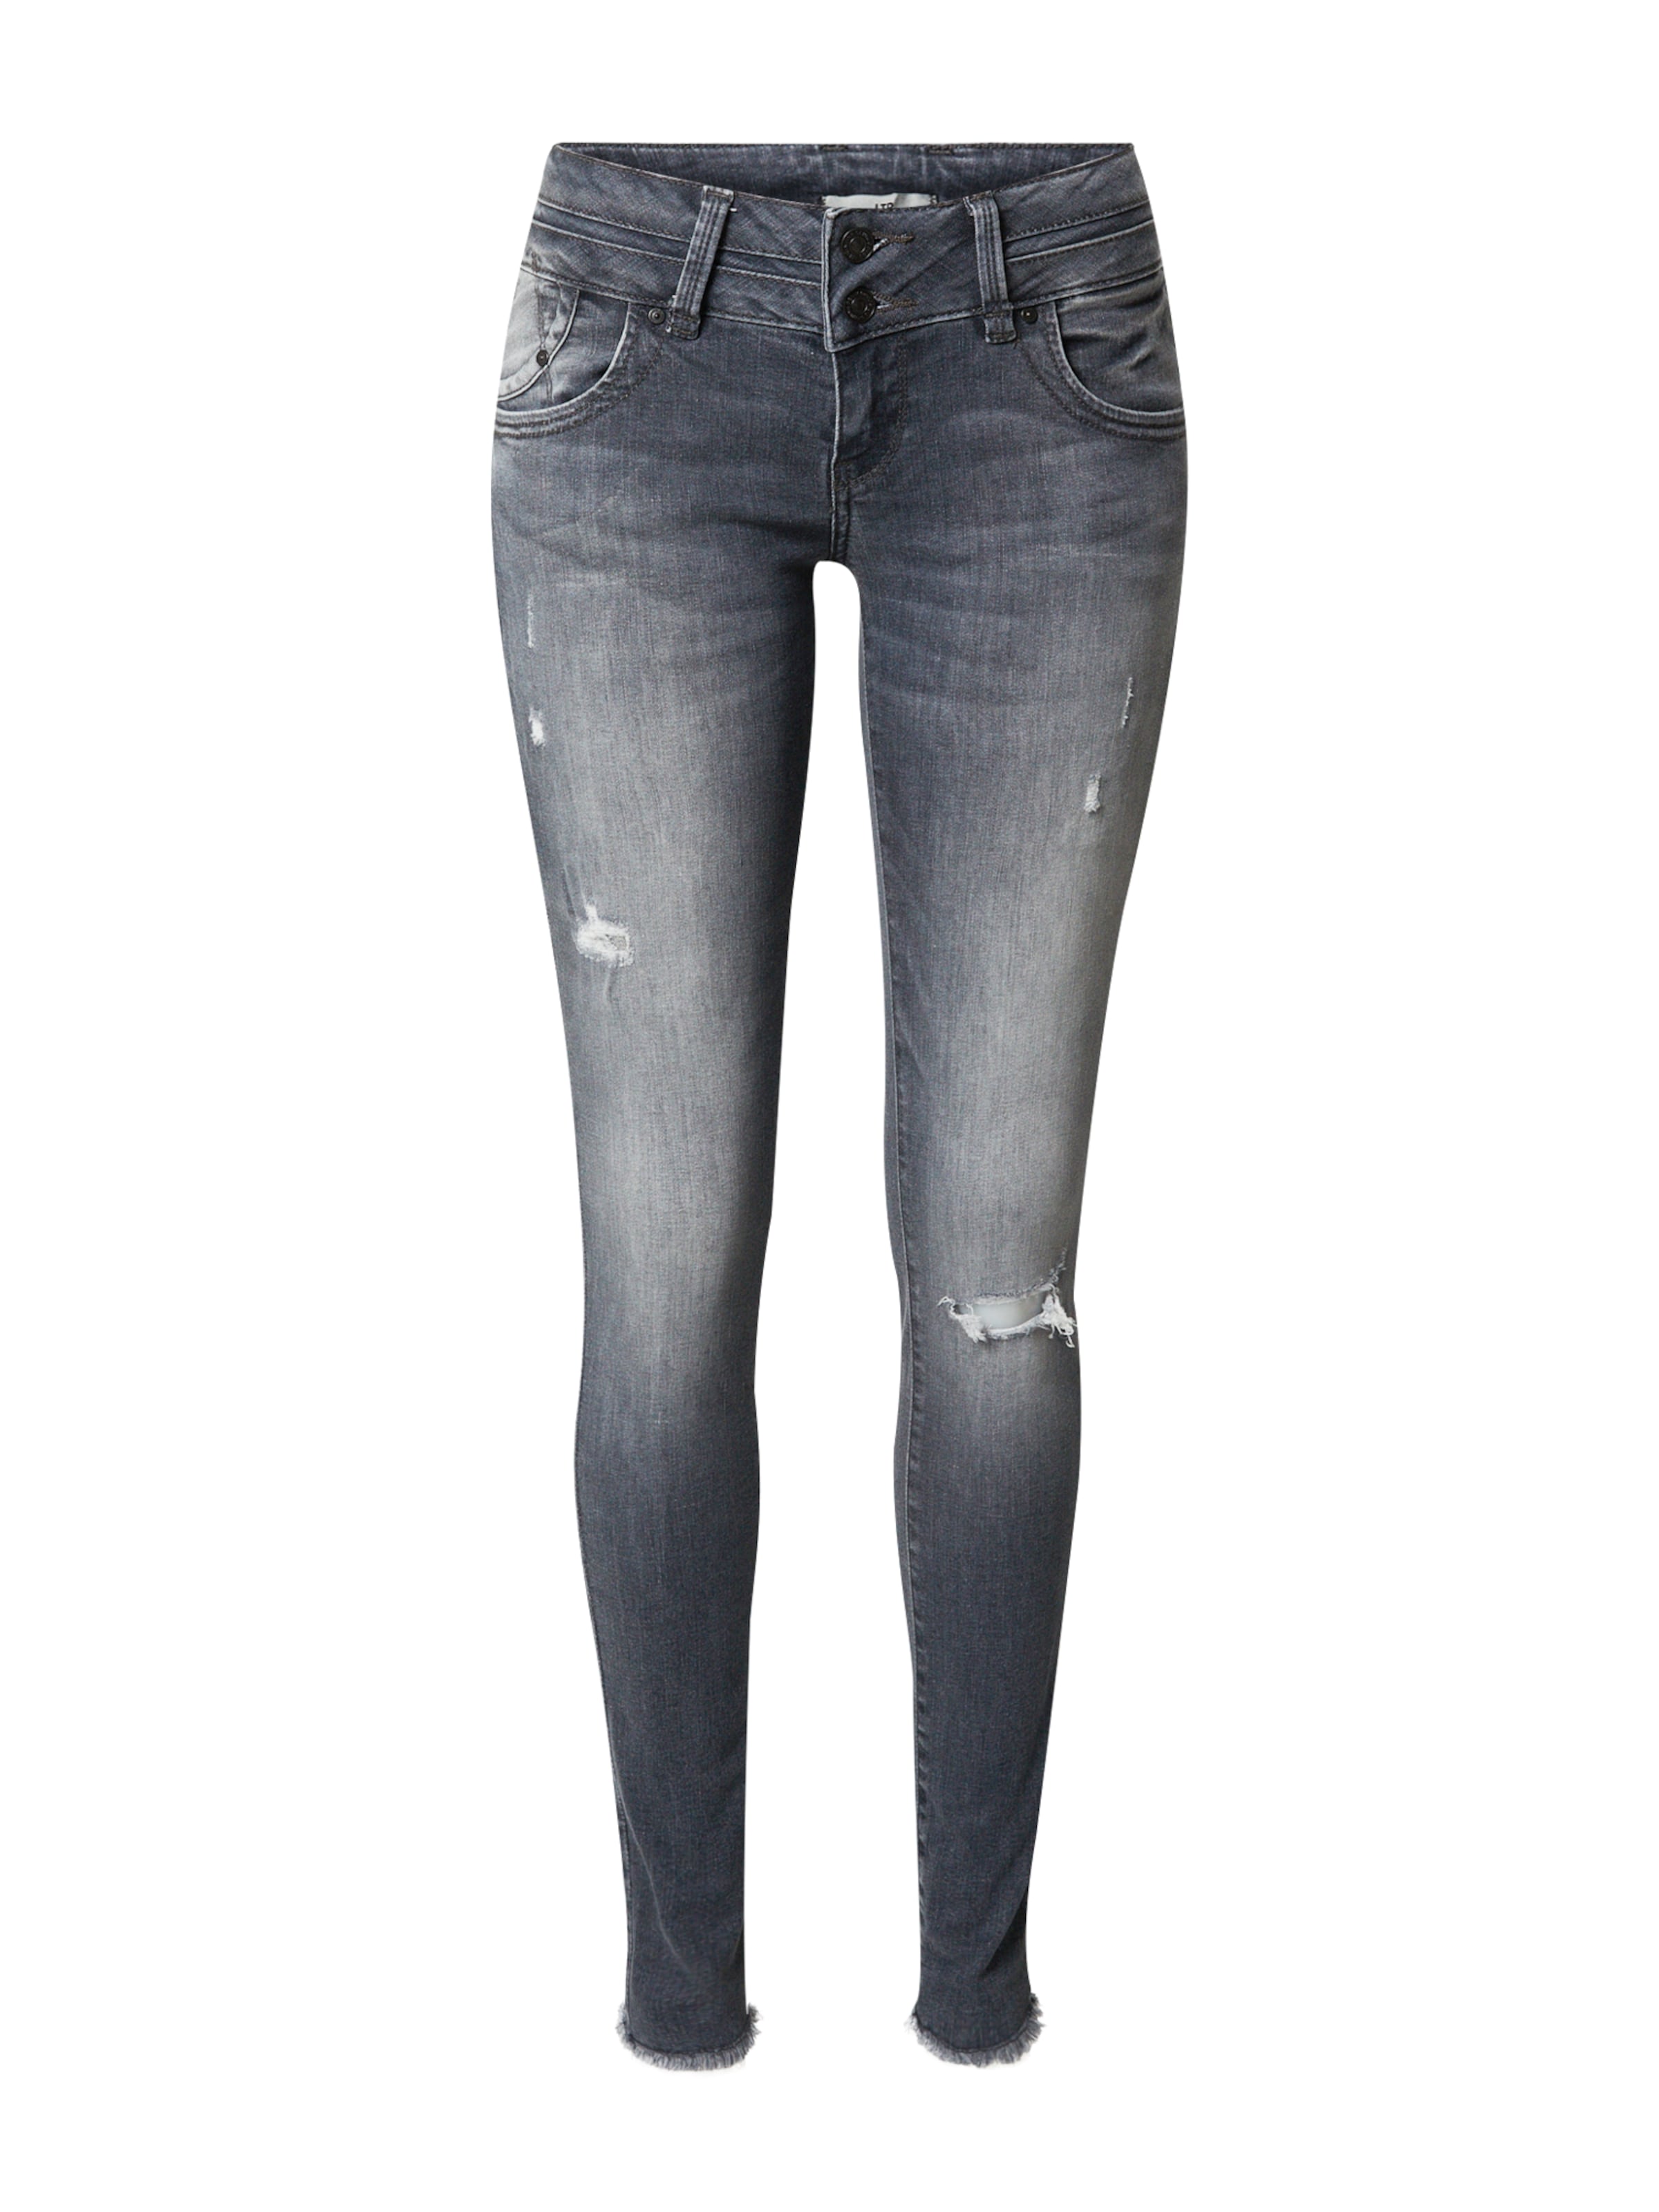 Jeans CARRIE ABOUT YOU Donna Abbigliamento Pantaloni e jeans Jeans Jeans straight 